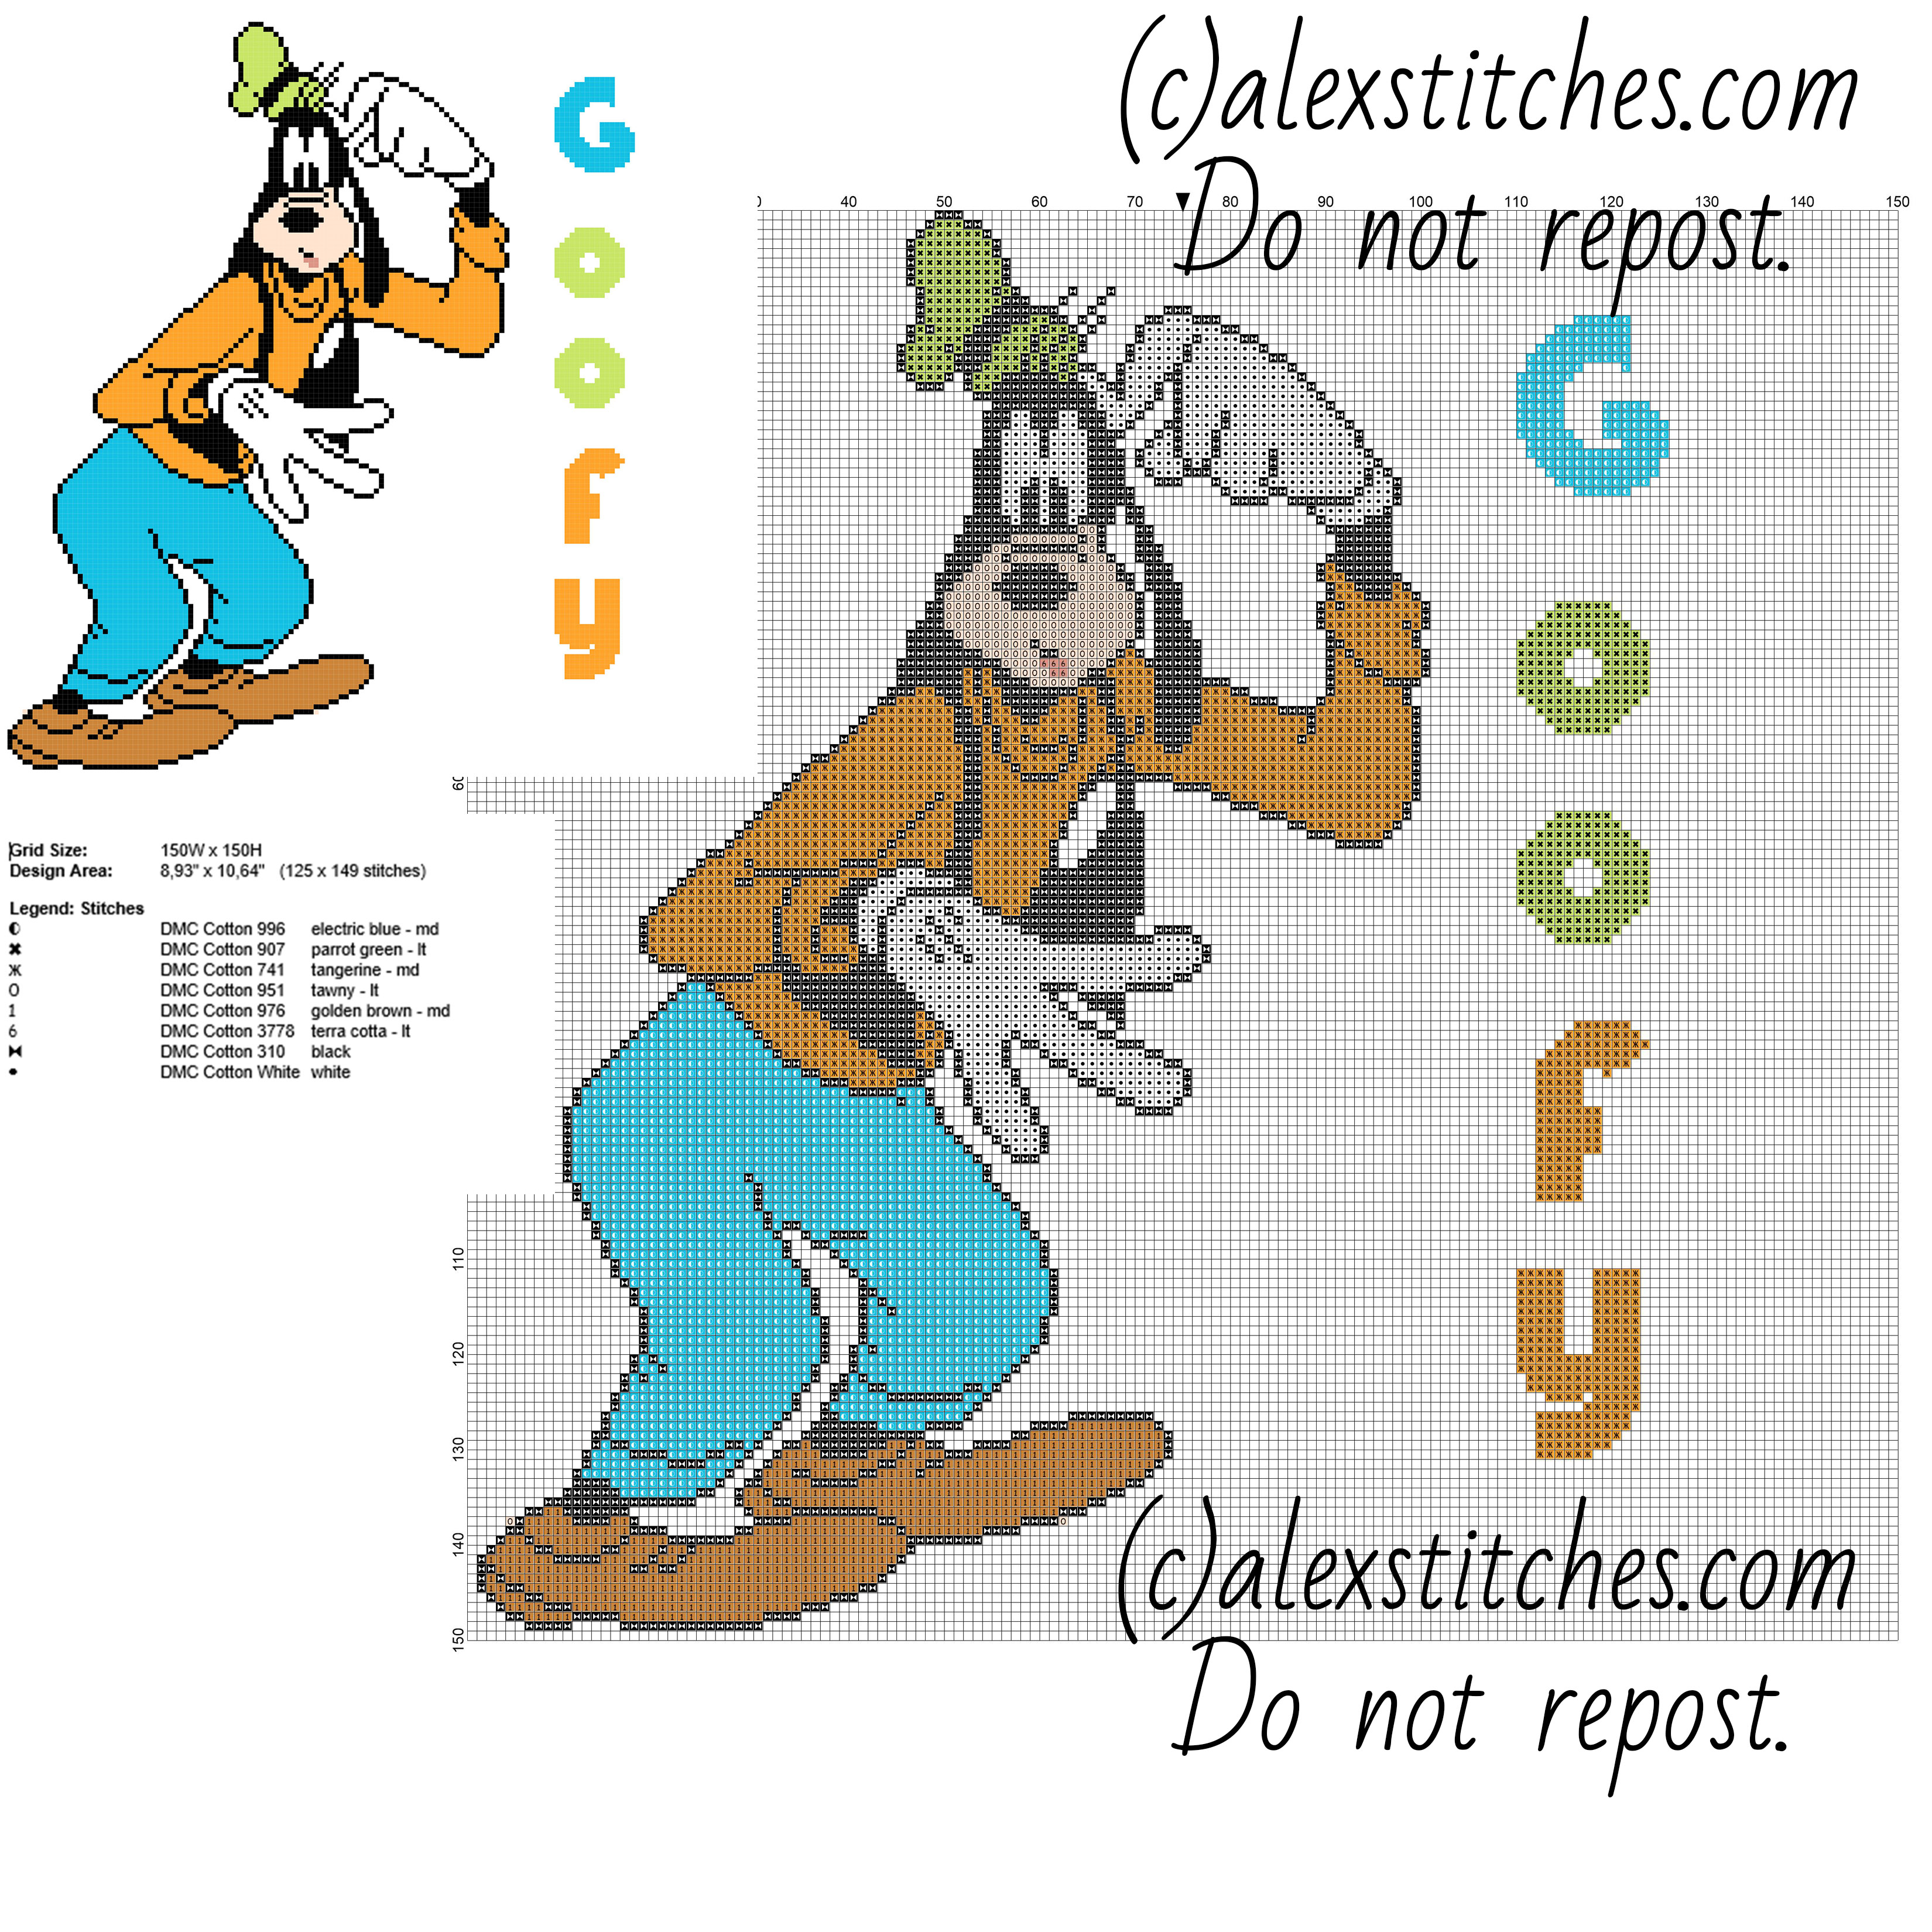 Disney Mickey Mouse Goofy character big size about 150 x 150 stitches with text name free cross stitch pattern